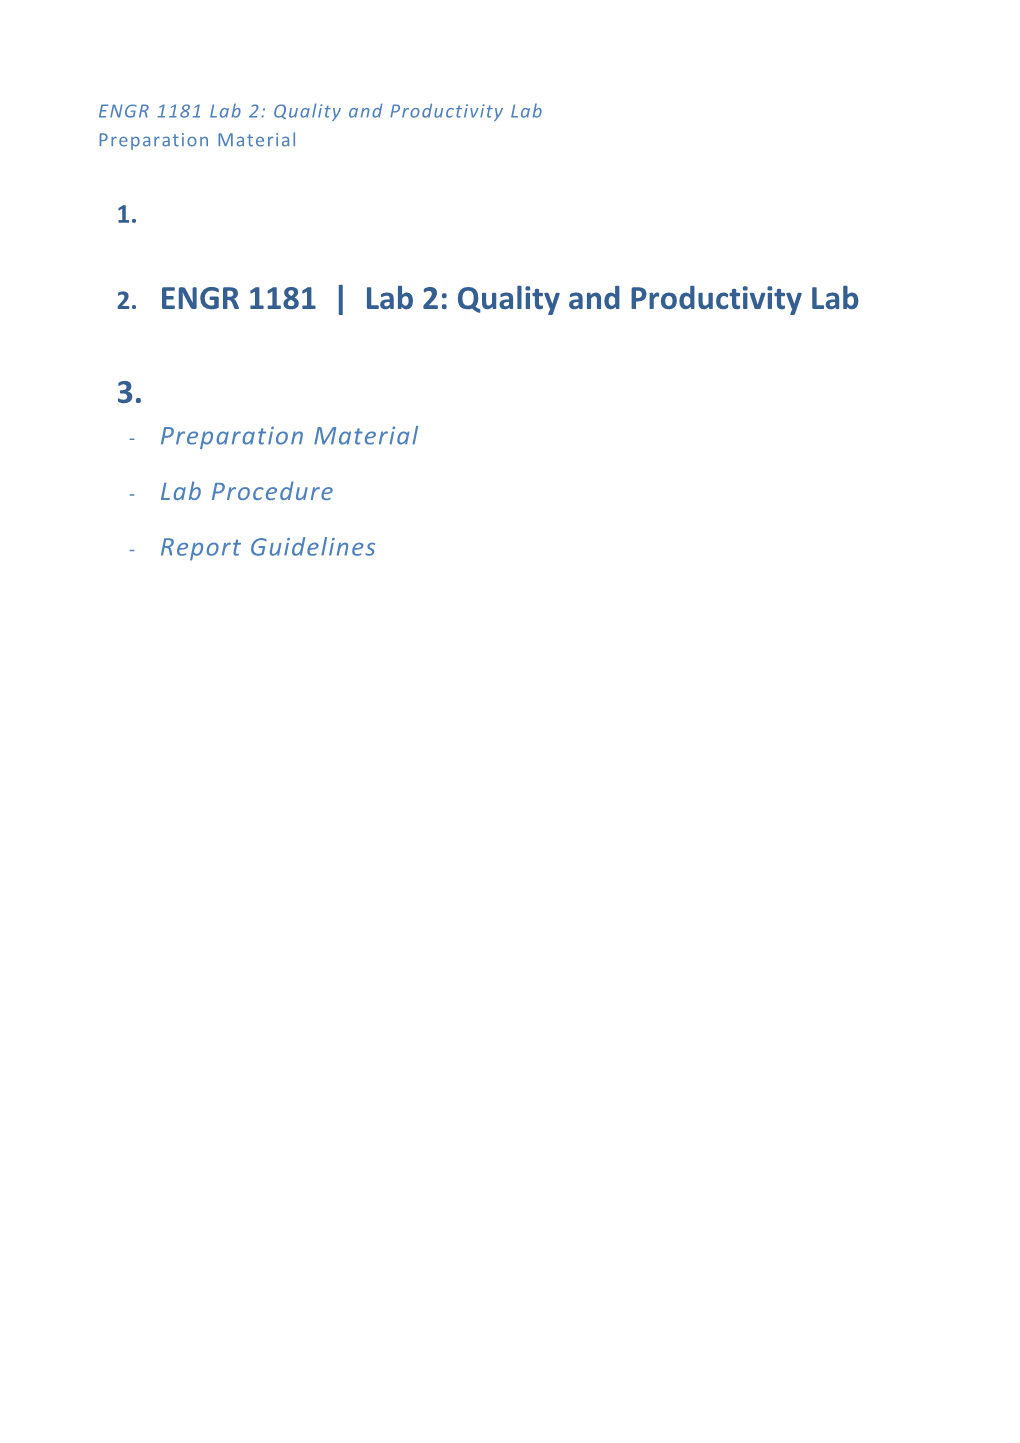 ENGR 1181 Lab 2: Quality and Productivity Lab